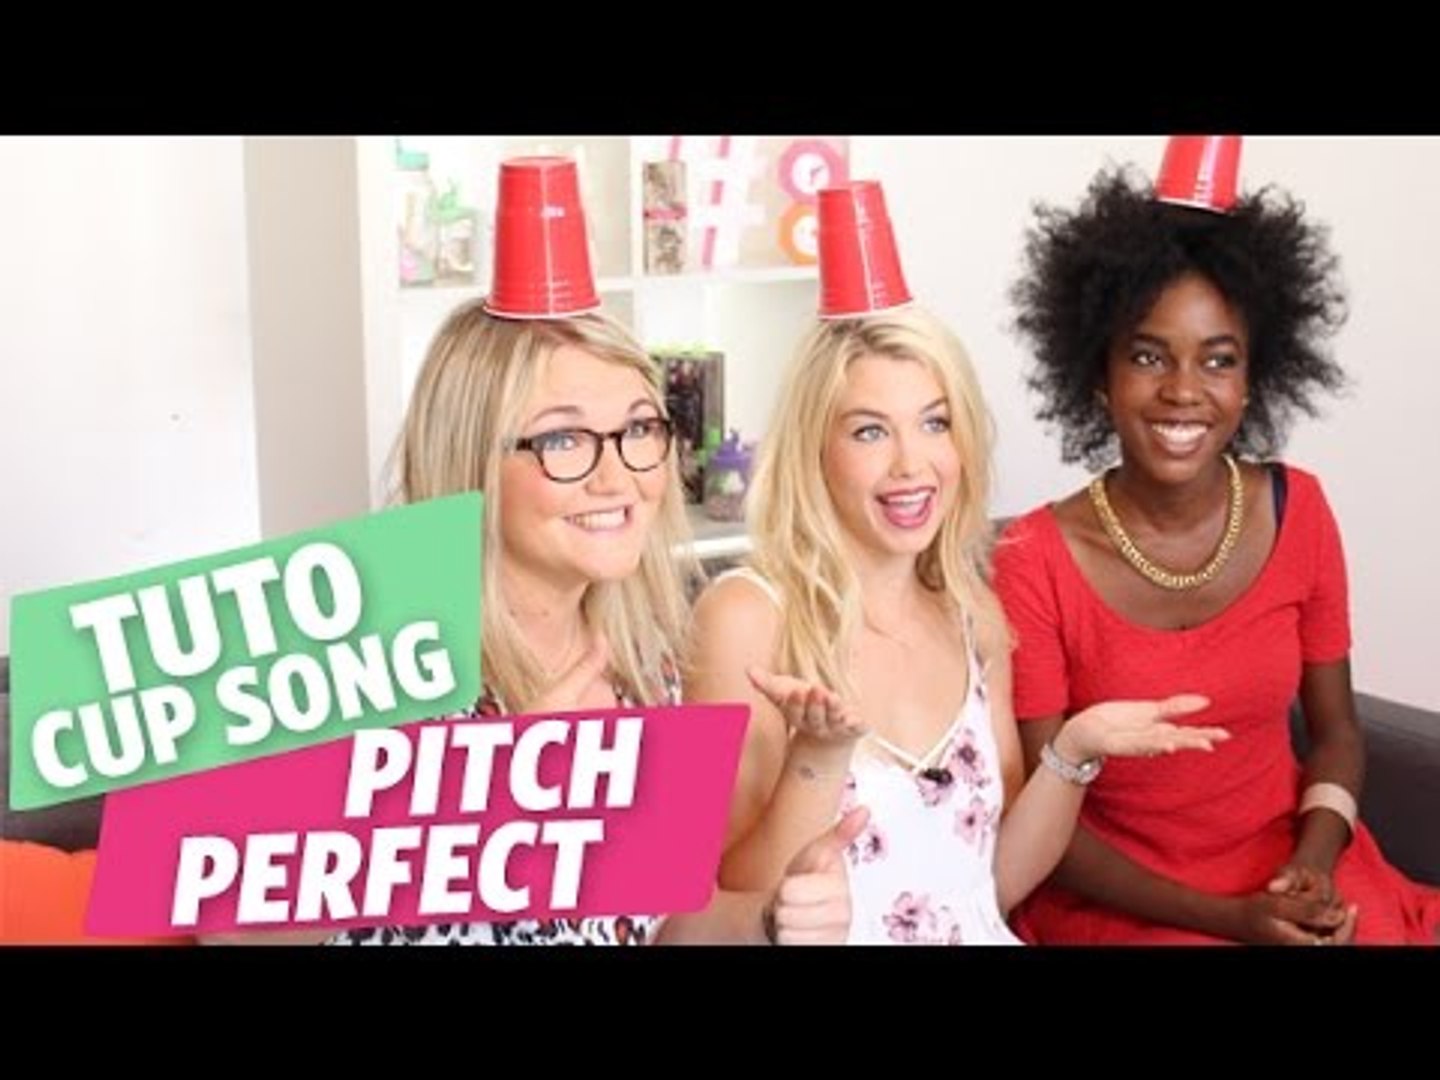 ✿ Tuto Pitch Perfect - Cup Song (When I'm Gone) par Marie, Lola et Inaya ✿  - Vidéo Dailymotion